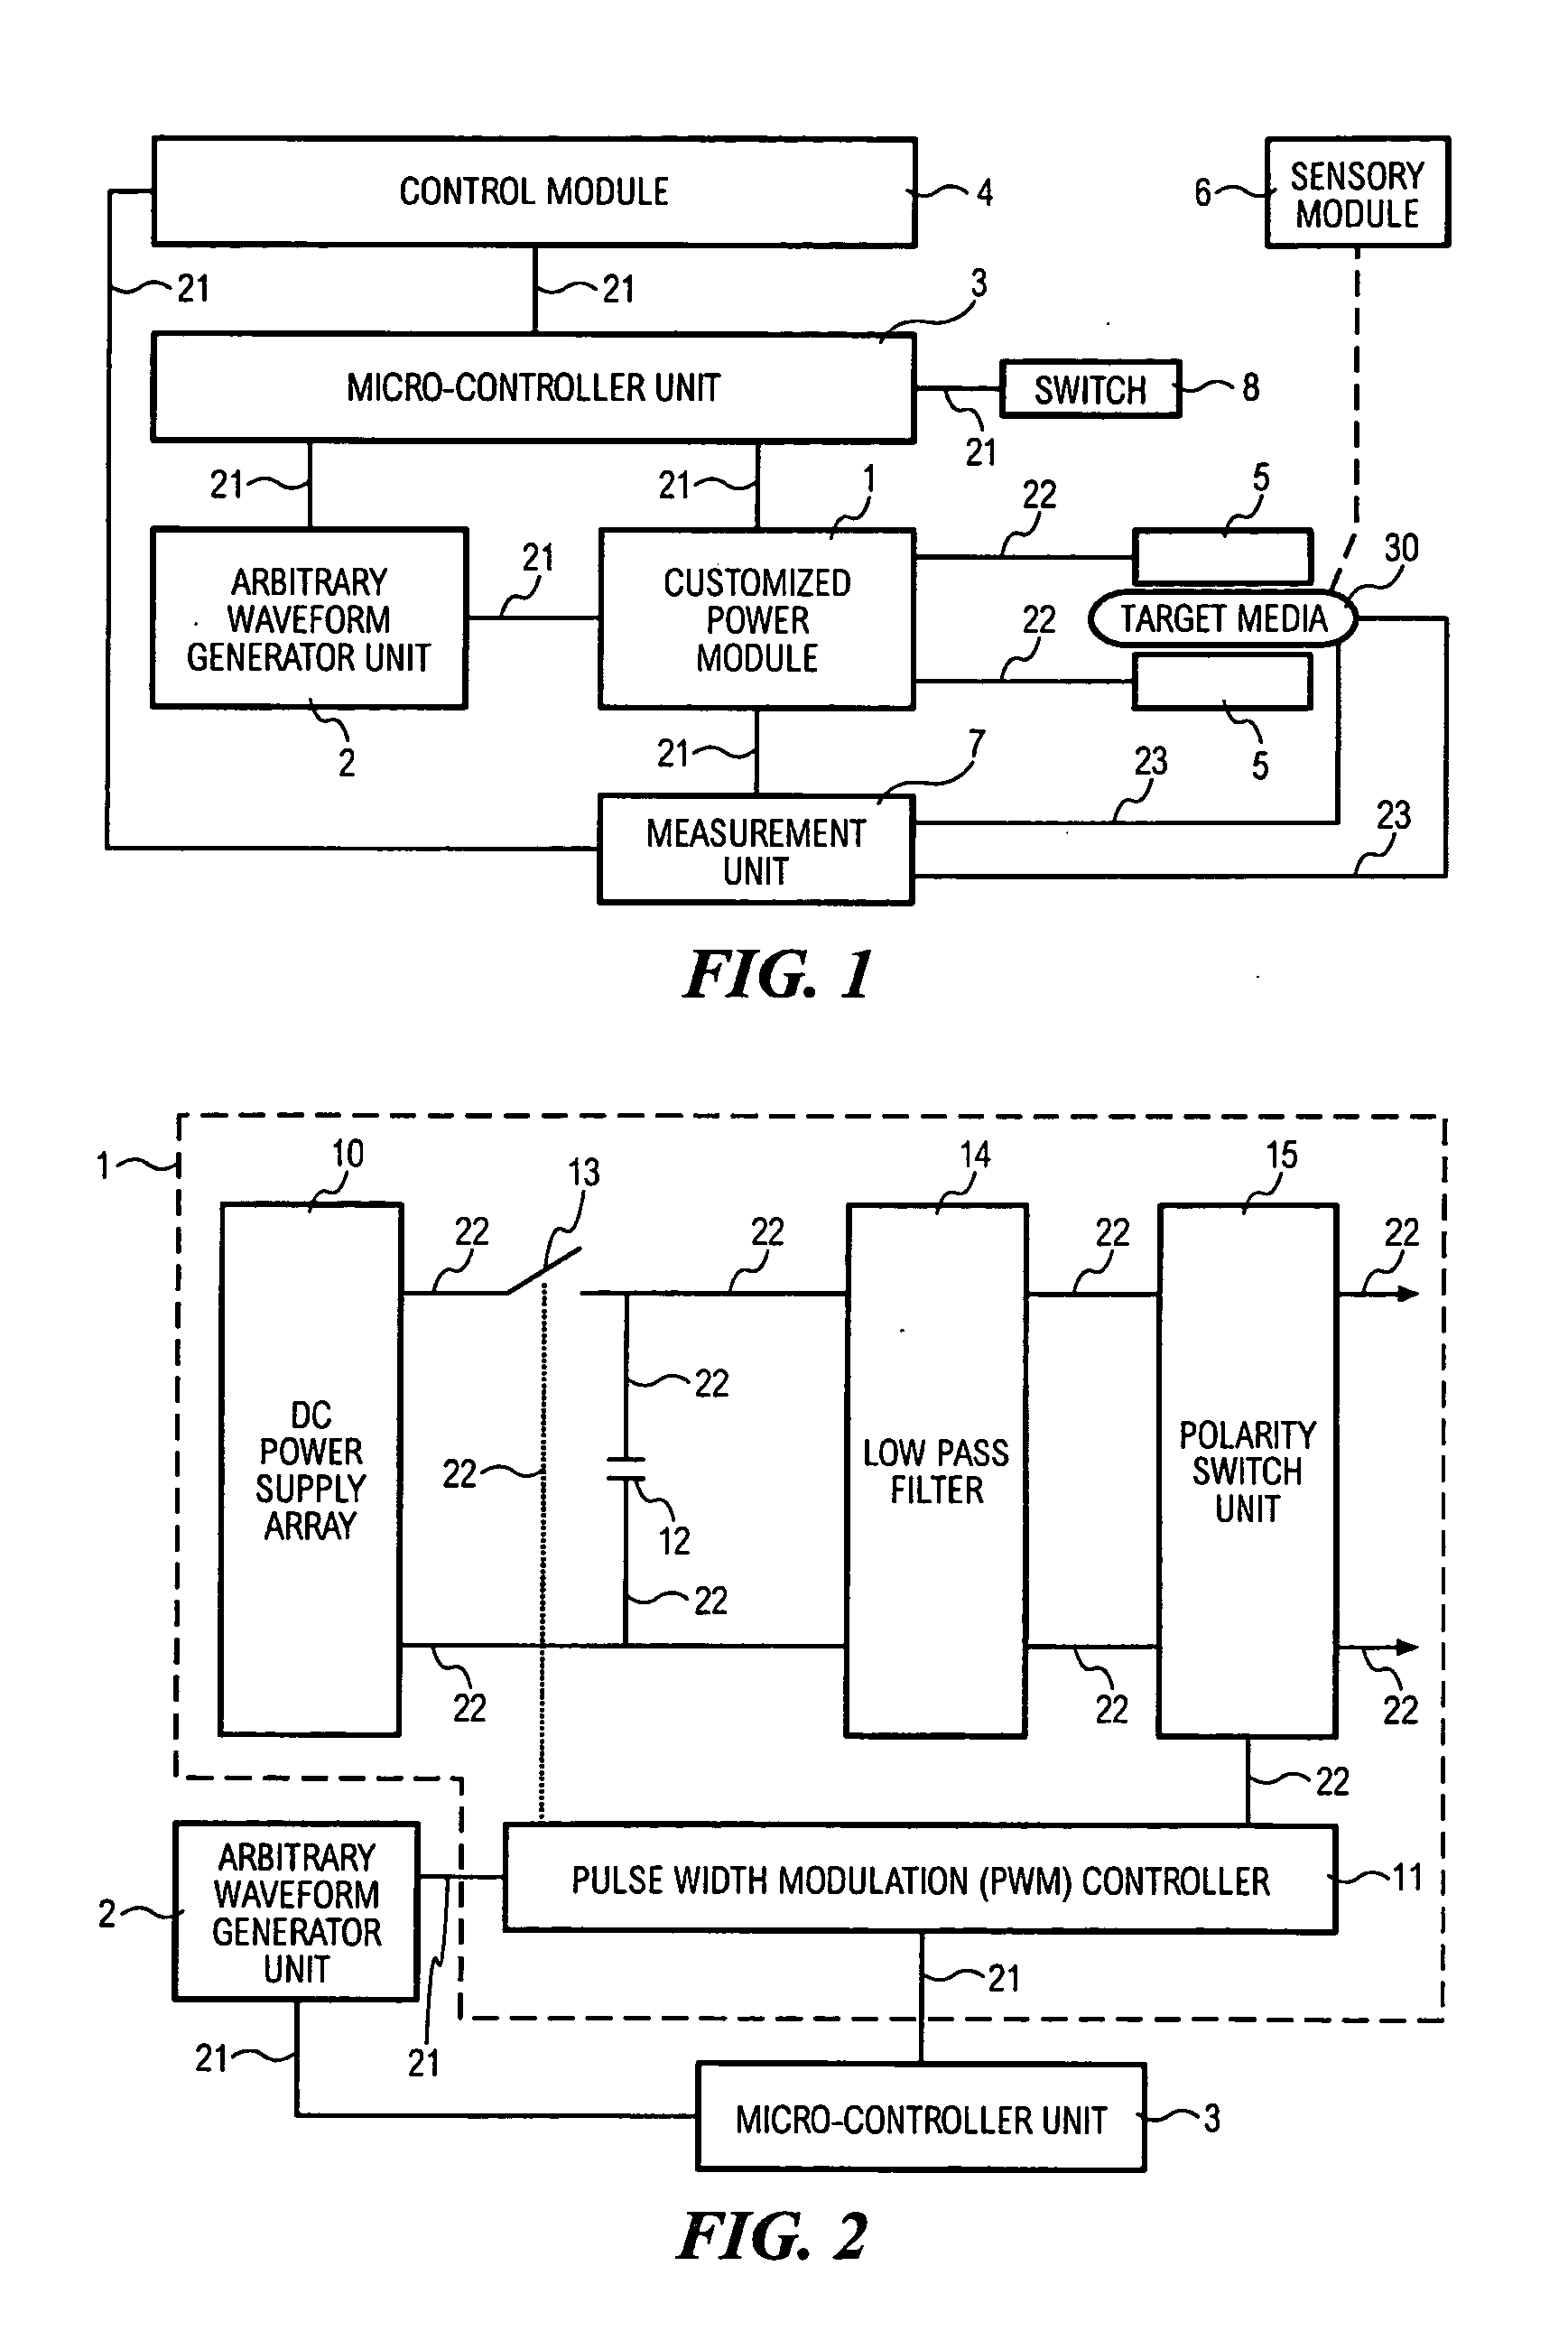 Programmable apparatus and method for optimizing and real time monitoring of gene transfection based on user configured arbitrary waveform pulsing train